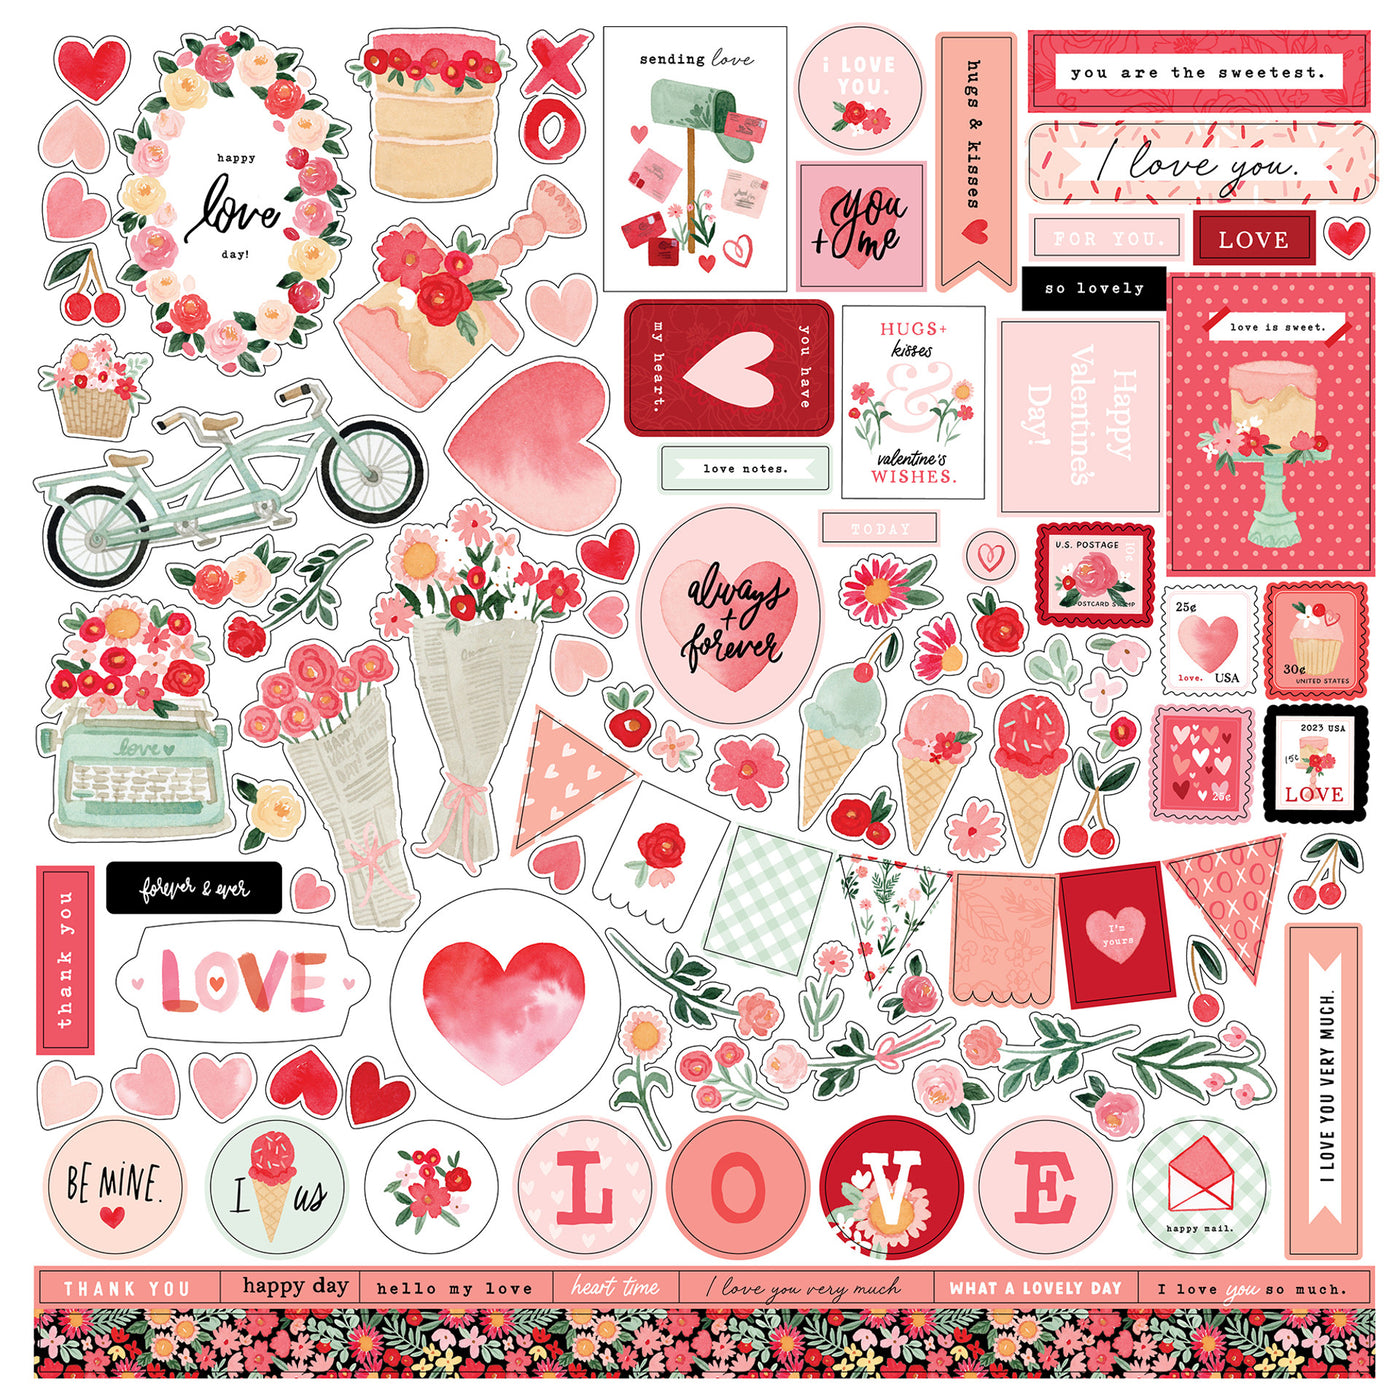 My Valentine Elements 12" x 12" Cardstock Stickers from the My Valentine Collection. The package includes one sheet of cardstock stickers with phrases and images of hearts, flowers, ice cream cones, banners, and more. 